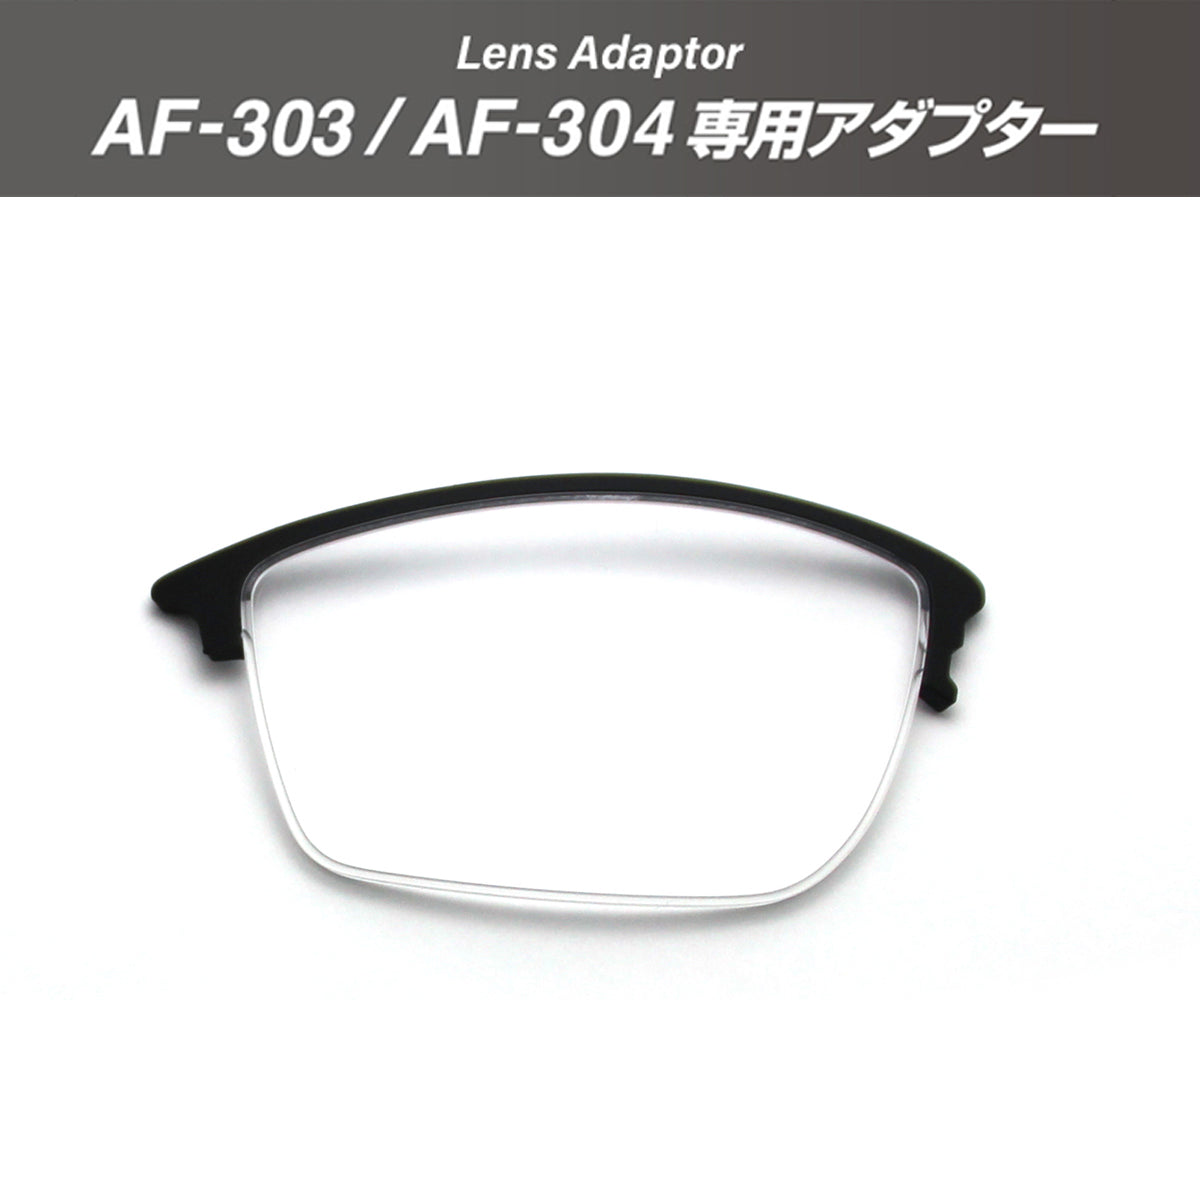 AirFly - AF303 C4( Light Smoke Lens)【Pre-order Now】